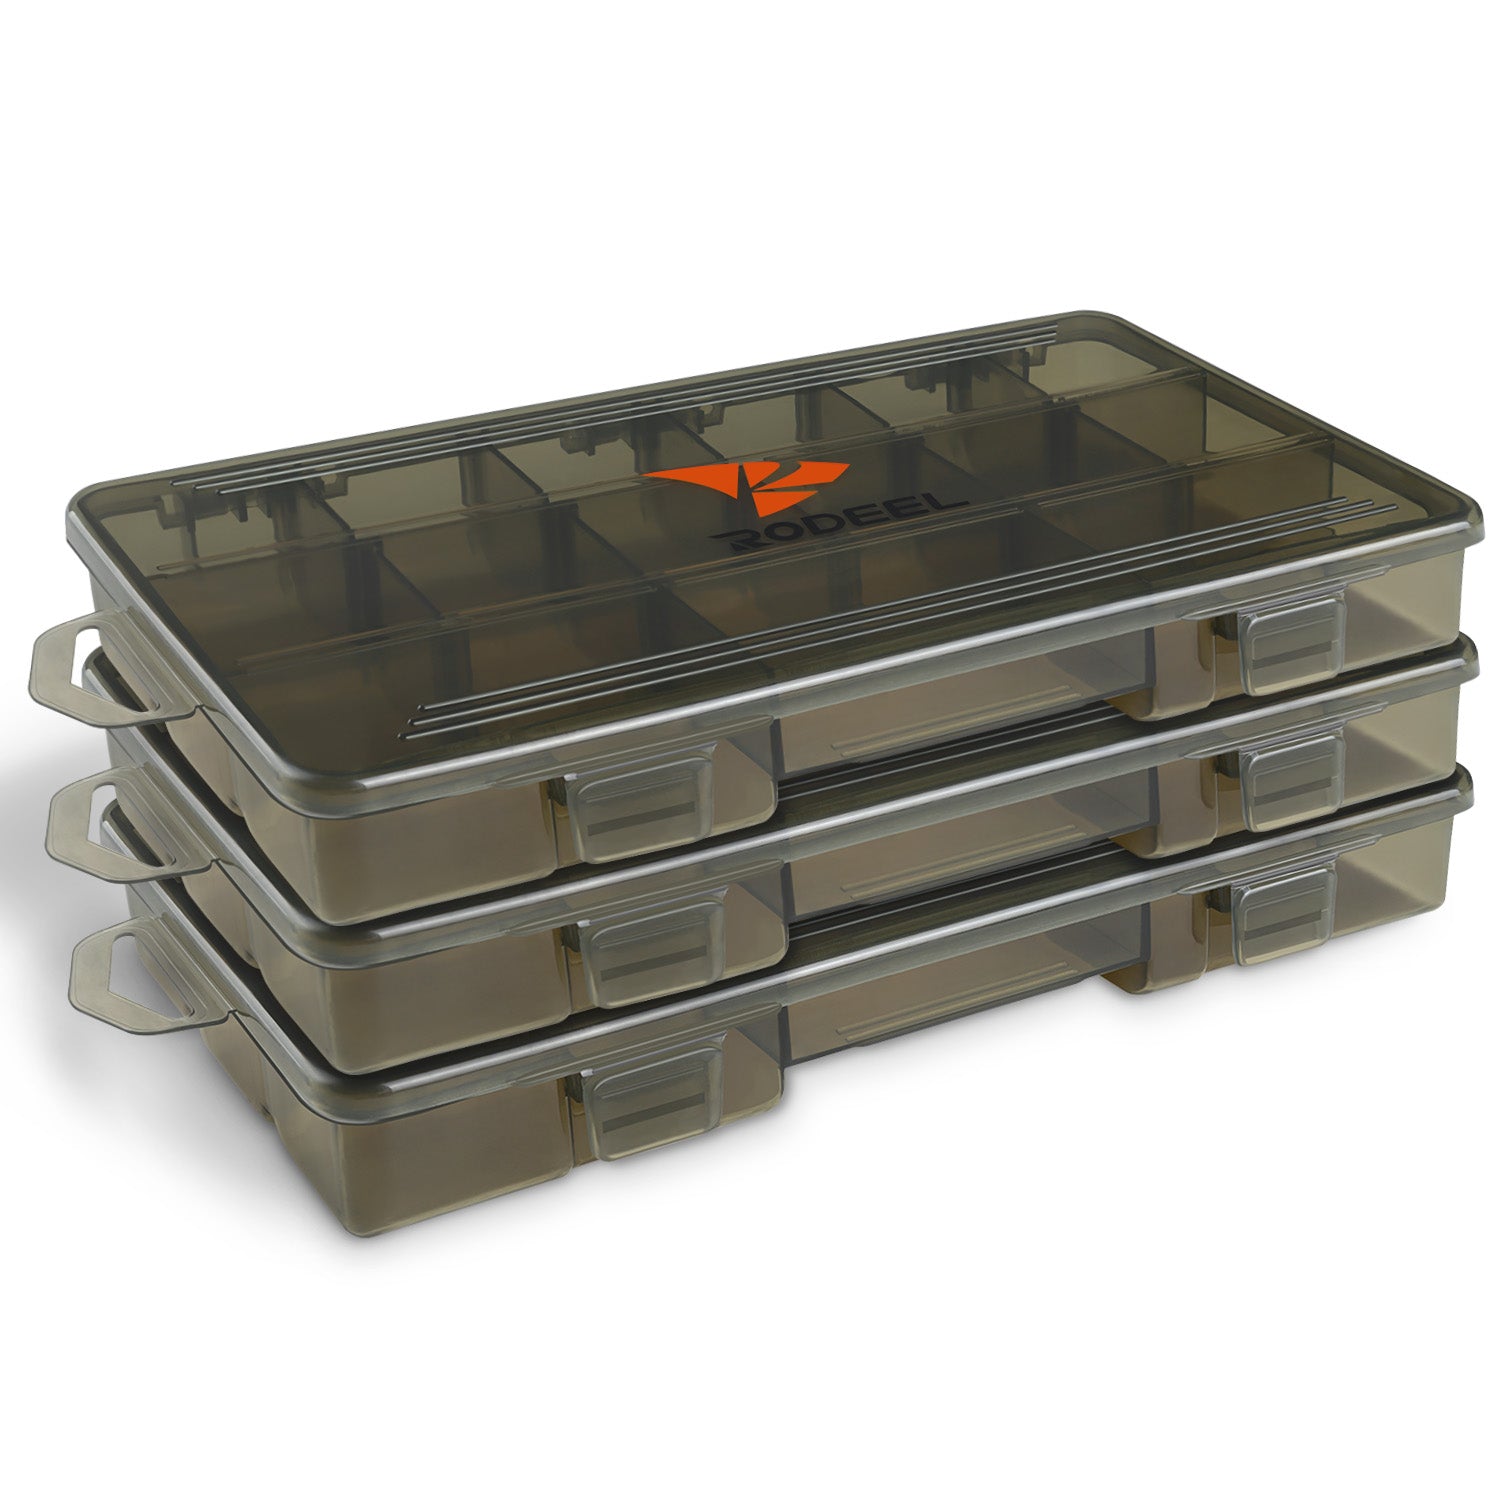 4 Tackle Boxes – Rodeel Fishing